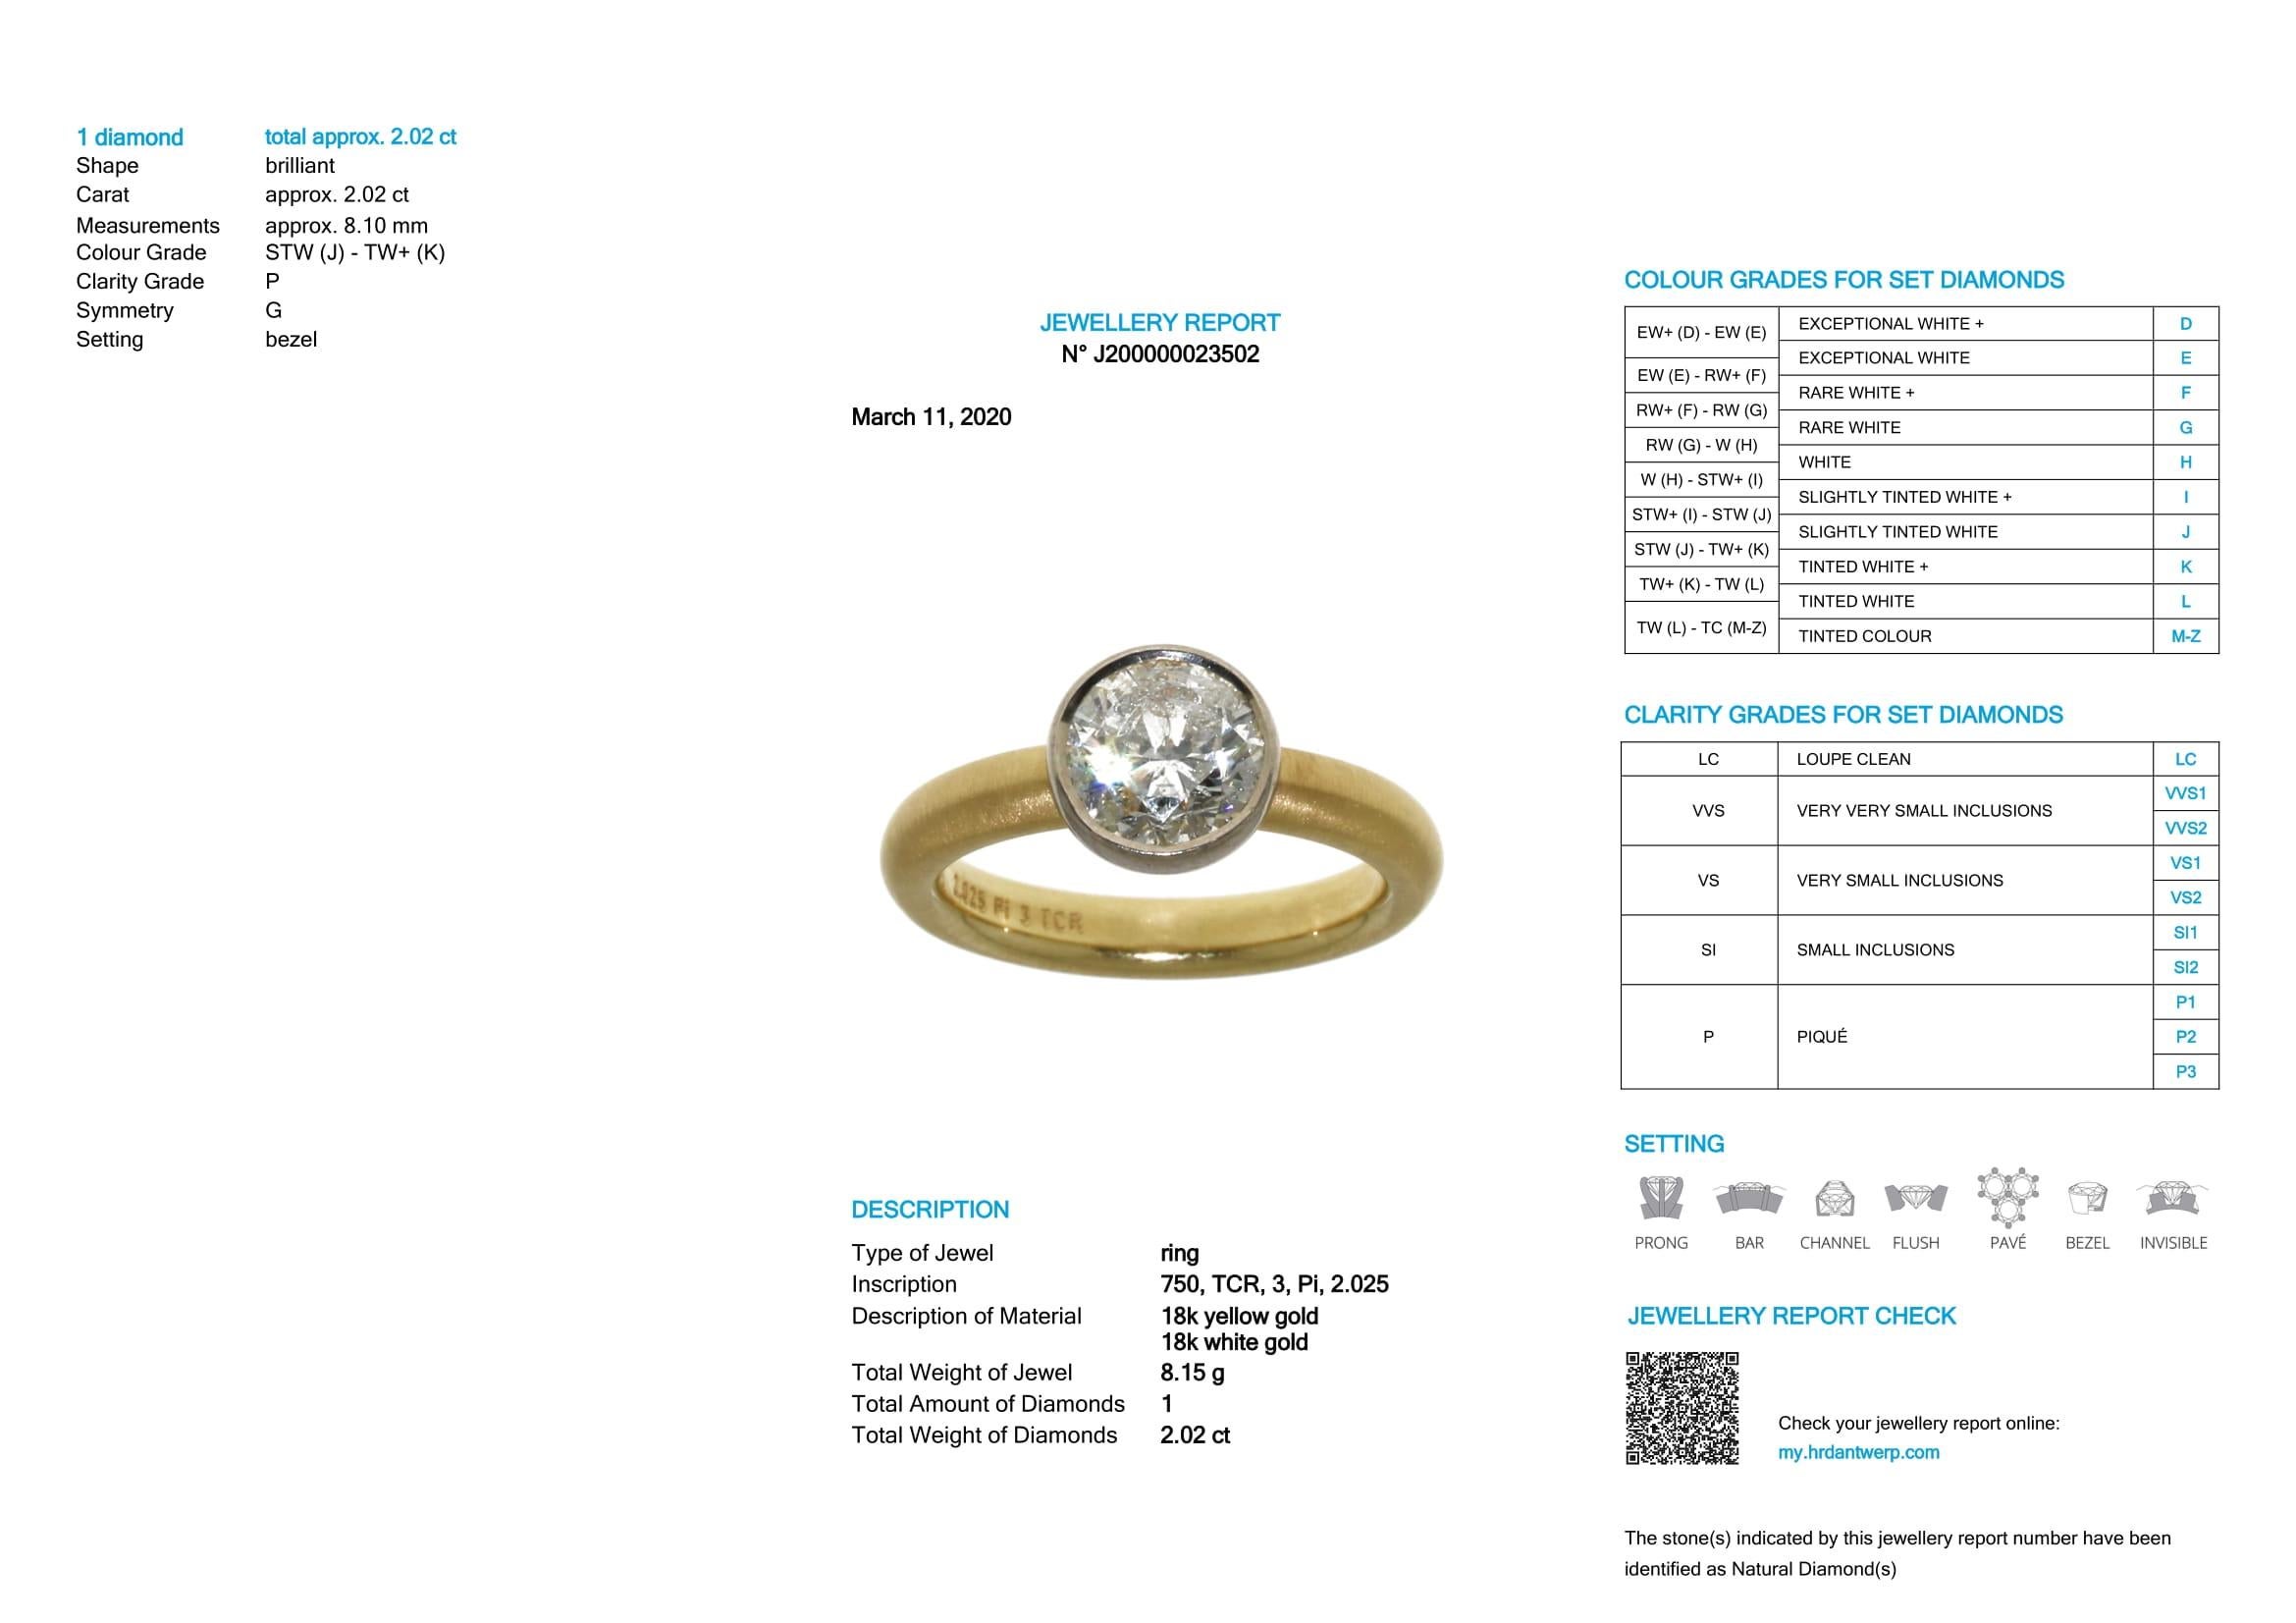 HRD Certified Solitaire Ring with 2.02Ct J-K/I(P) 18K Gold 

SOLITAIRE 202

HRD Certified Solitaire Ring with 2.02Ct J-K/I(P) 18K Gold in (White Gold)Bezel Setting. 
High Gloss Finish, Fine Solitaire Ring in 18k Gold. 
Any Ring Size possible. 


5